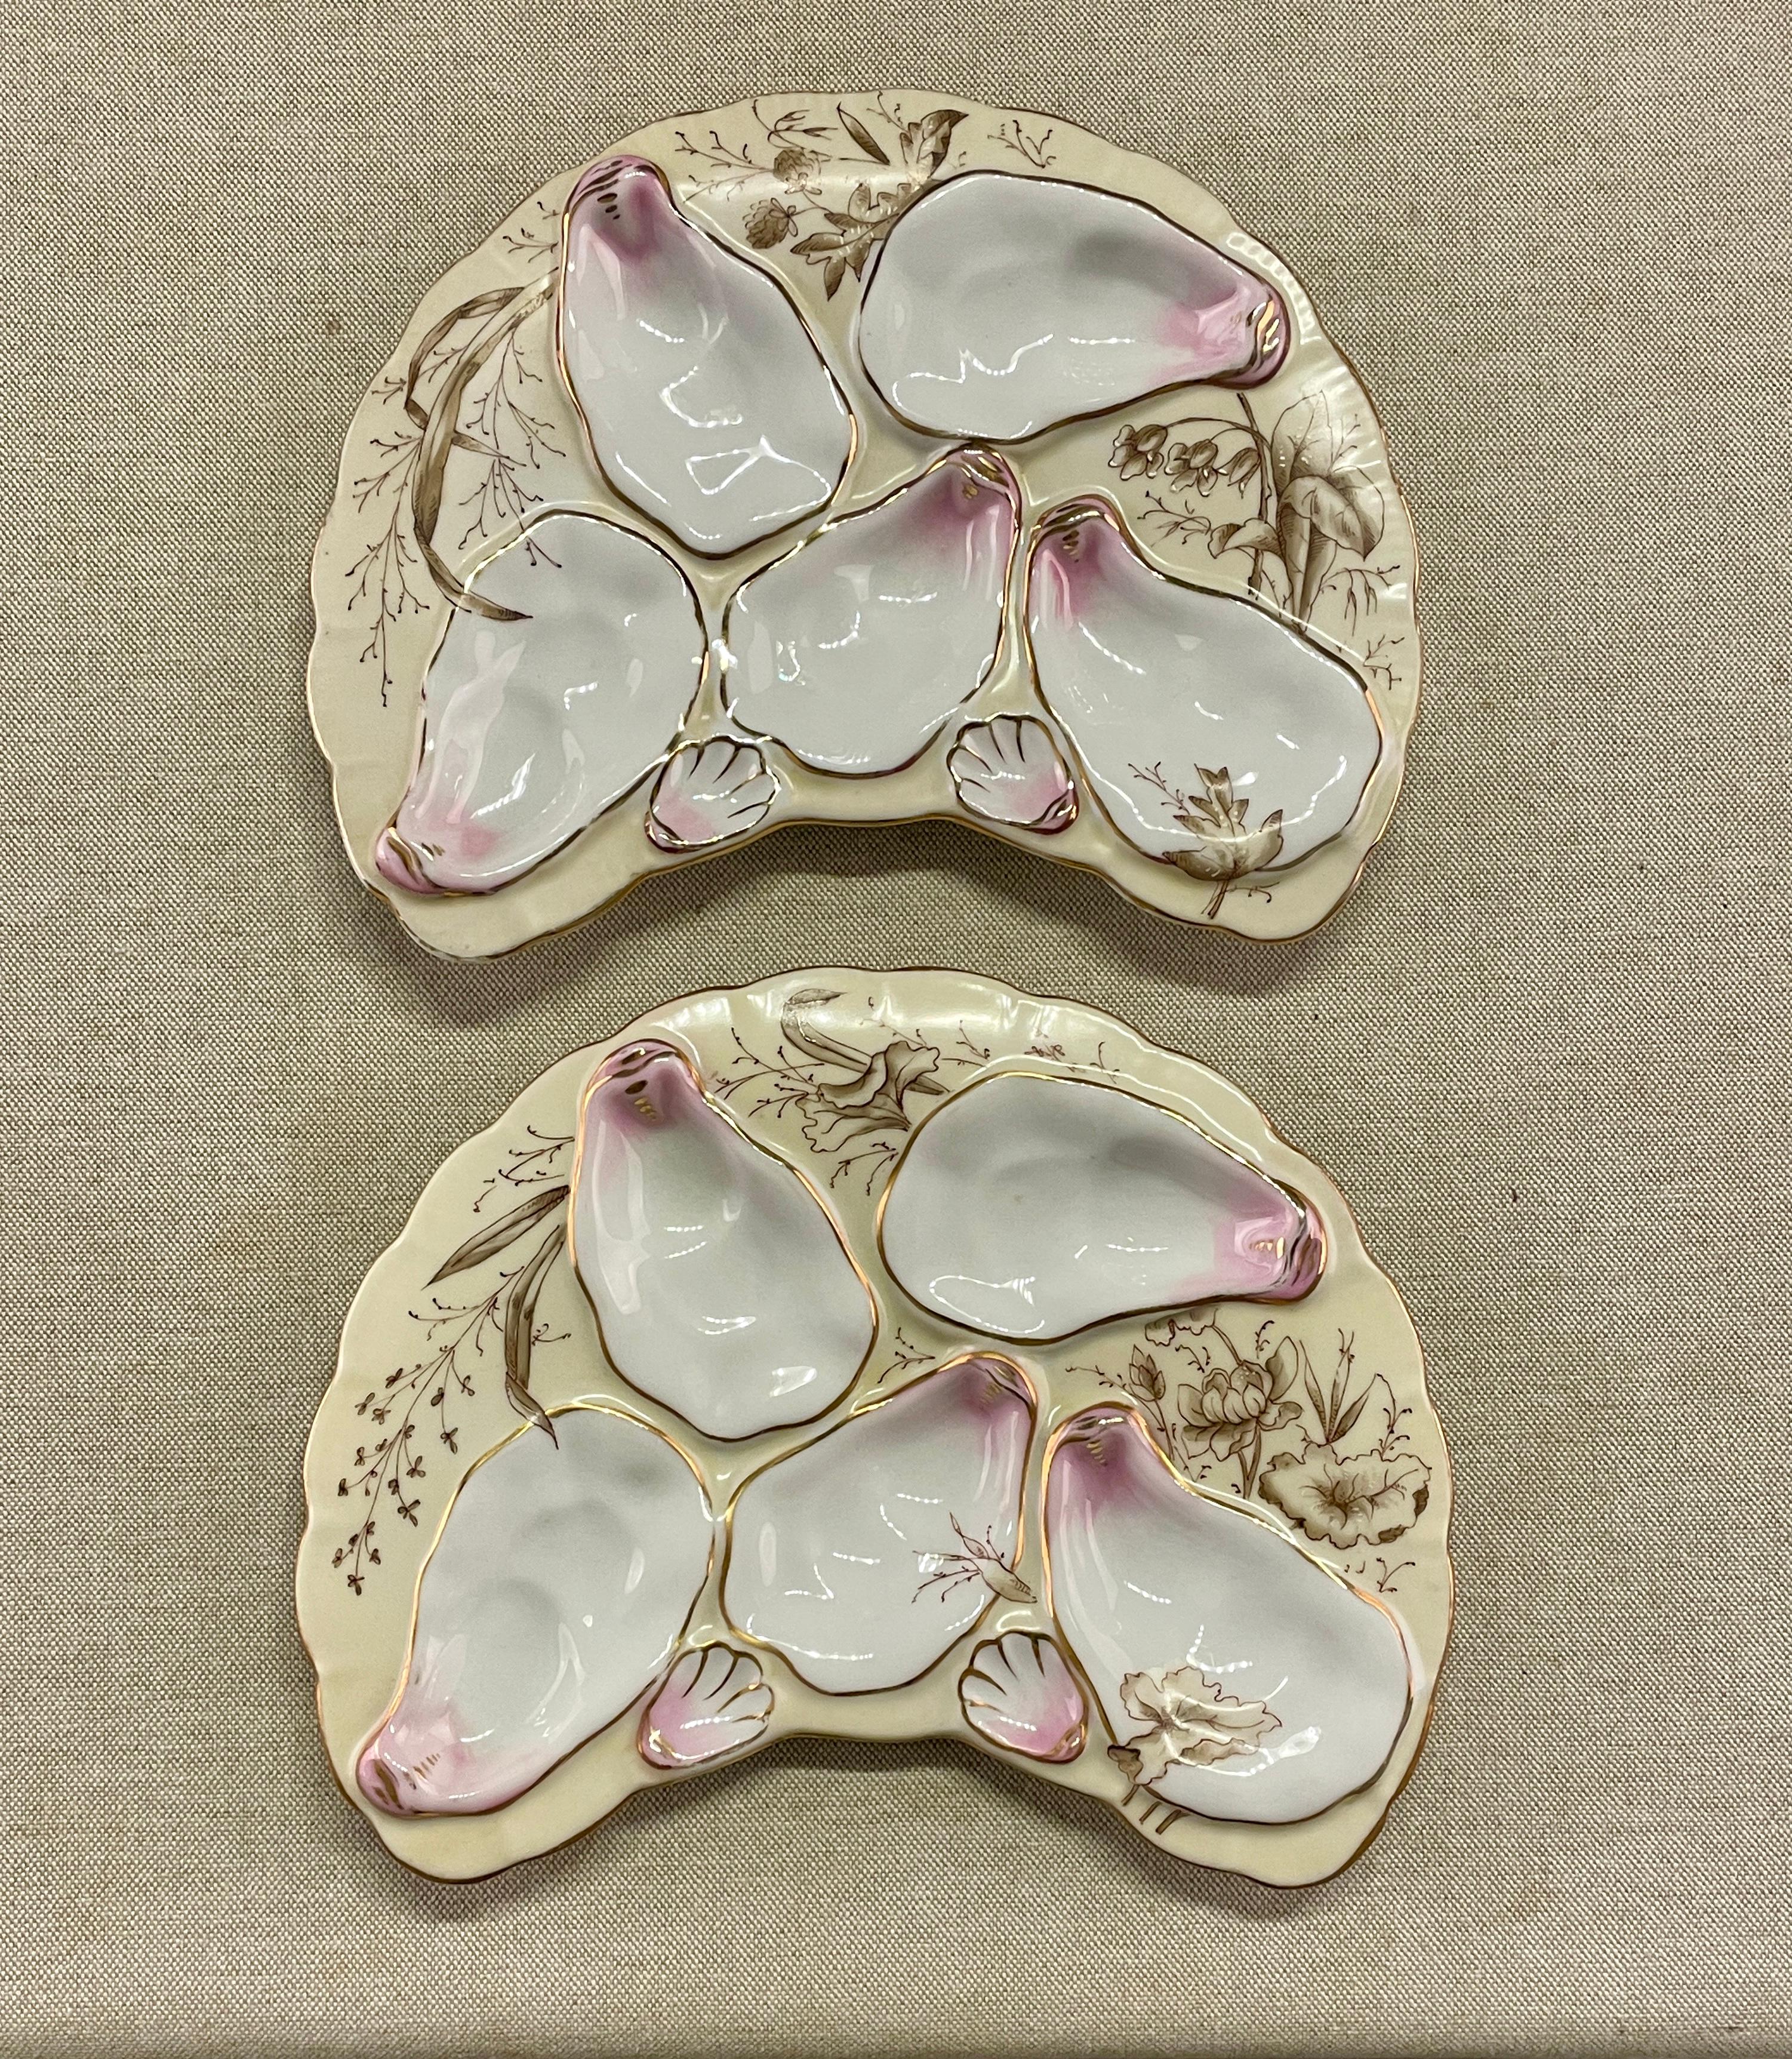 A good pair of Porcelain oyster plates from Limoges made for the ABR.FRENCH & Co in Boston with 5 oysters wells and gilt decor. Dimensions are 9